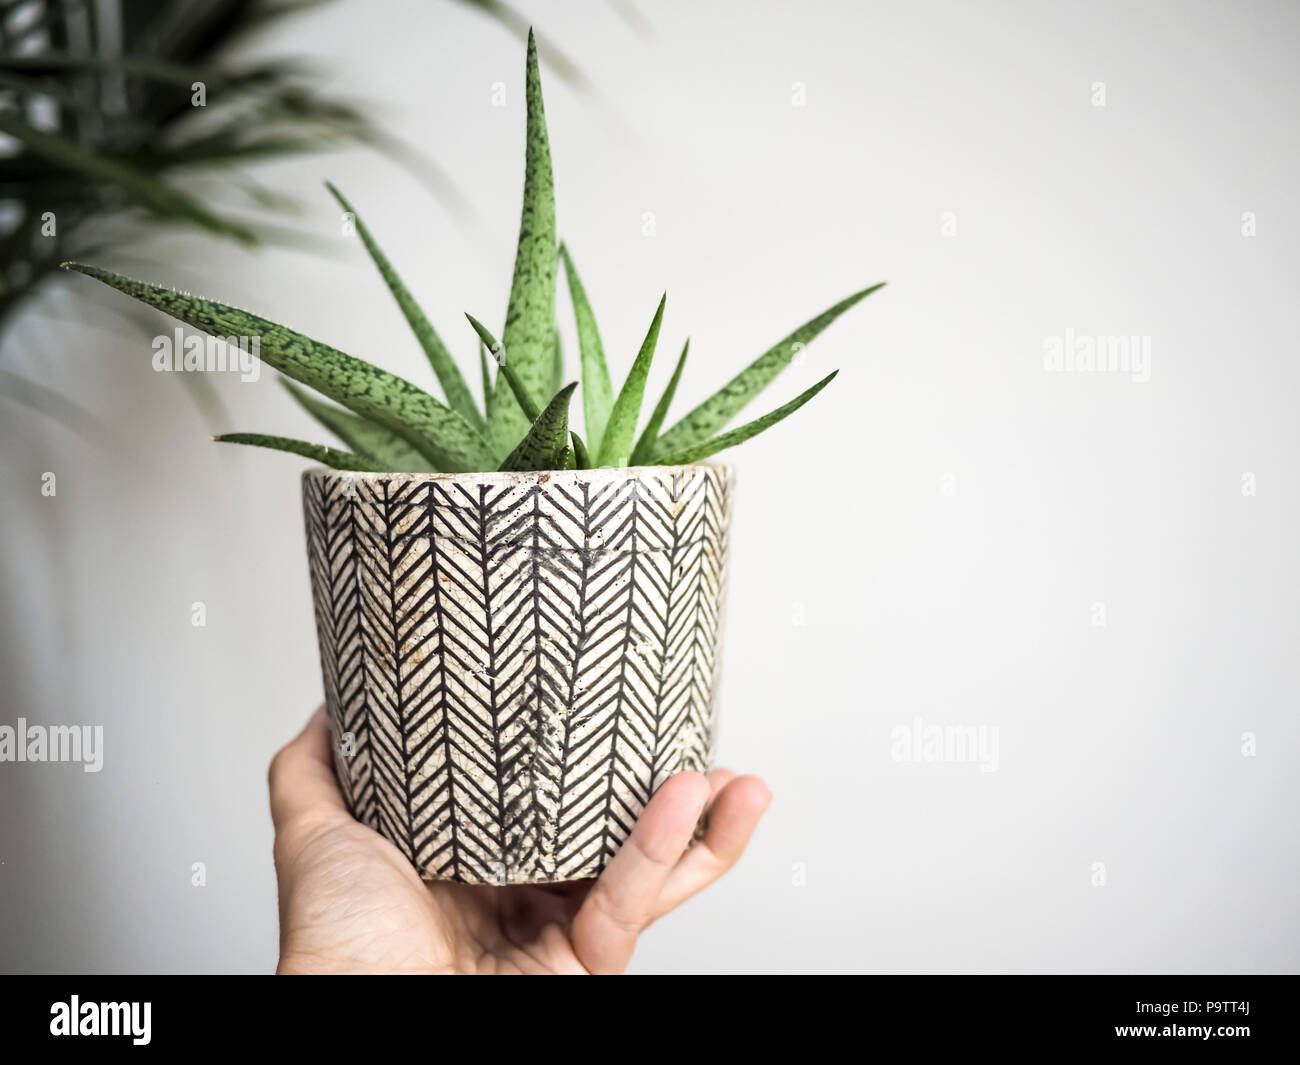 Hand holding a haworthia succulent in a striped pot against a white wall Stock Photo